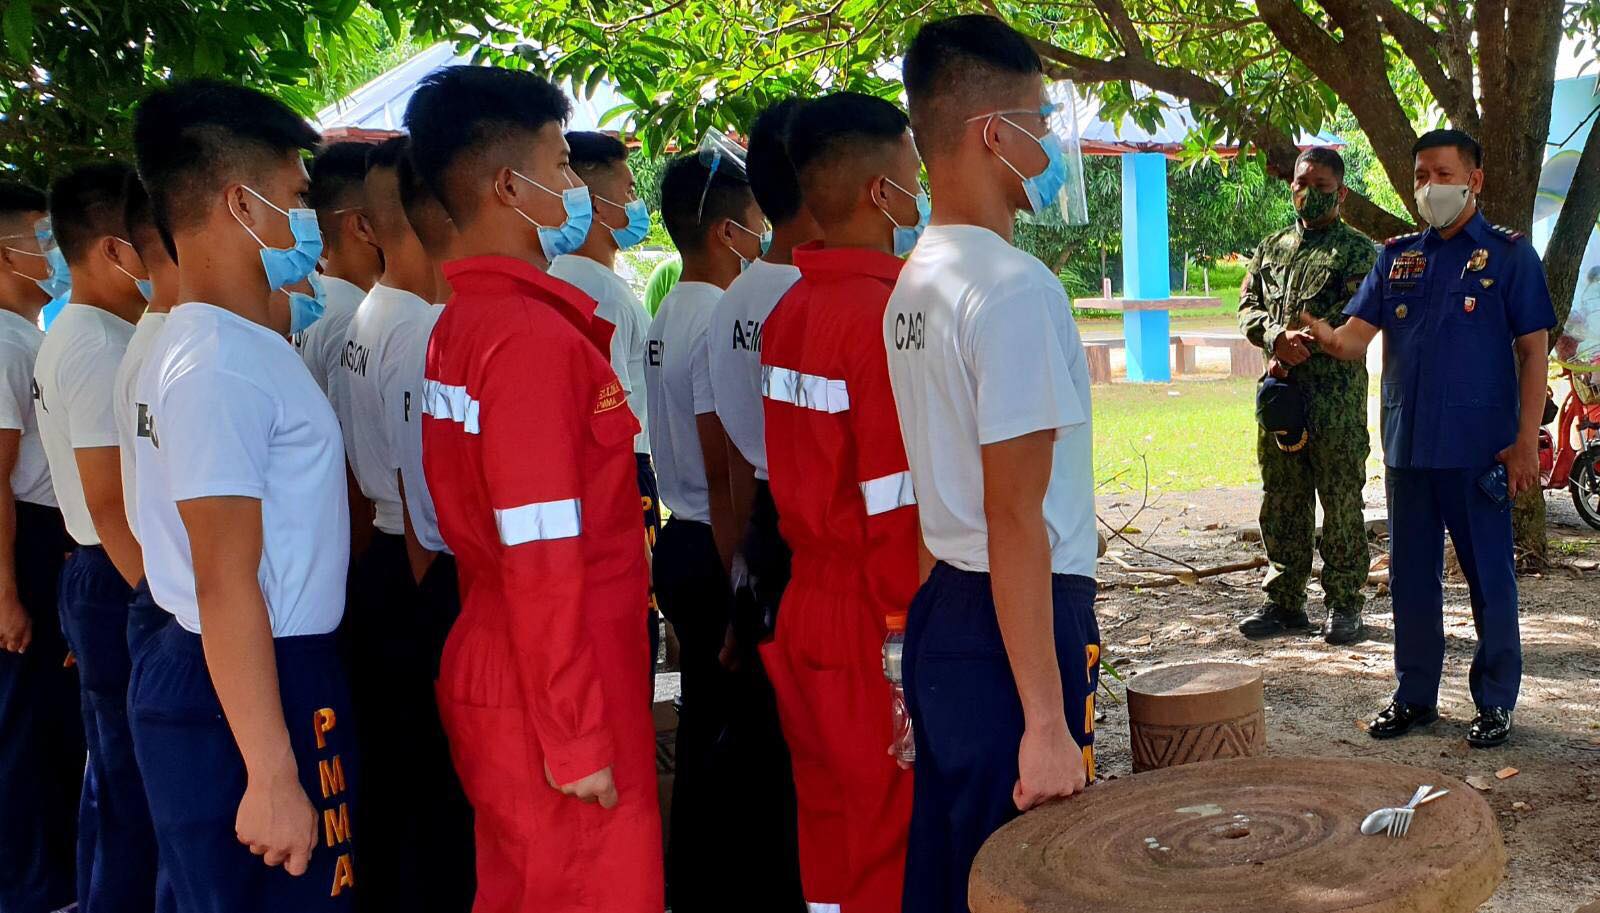 Death of PMMA cadet sparks calls for justice, reform in academy